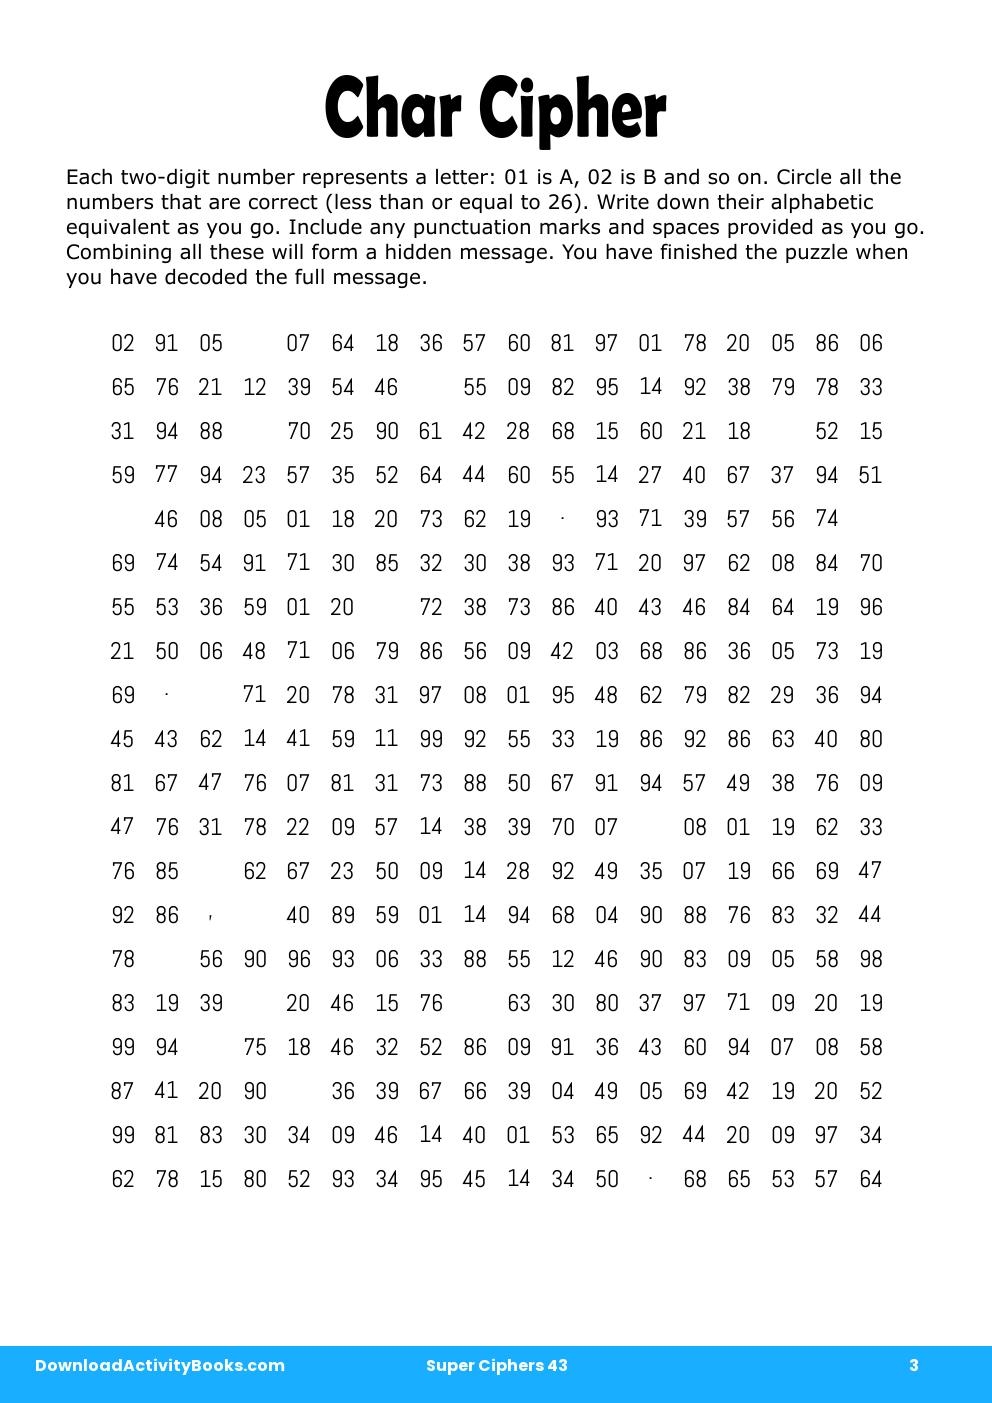 Char Cipher in Super Ciphers 43